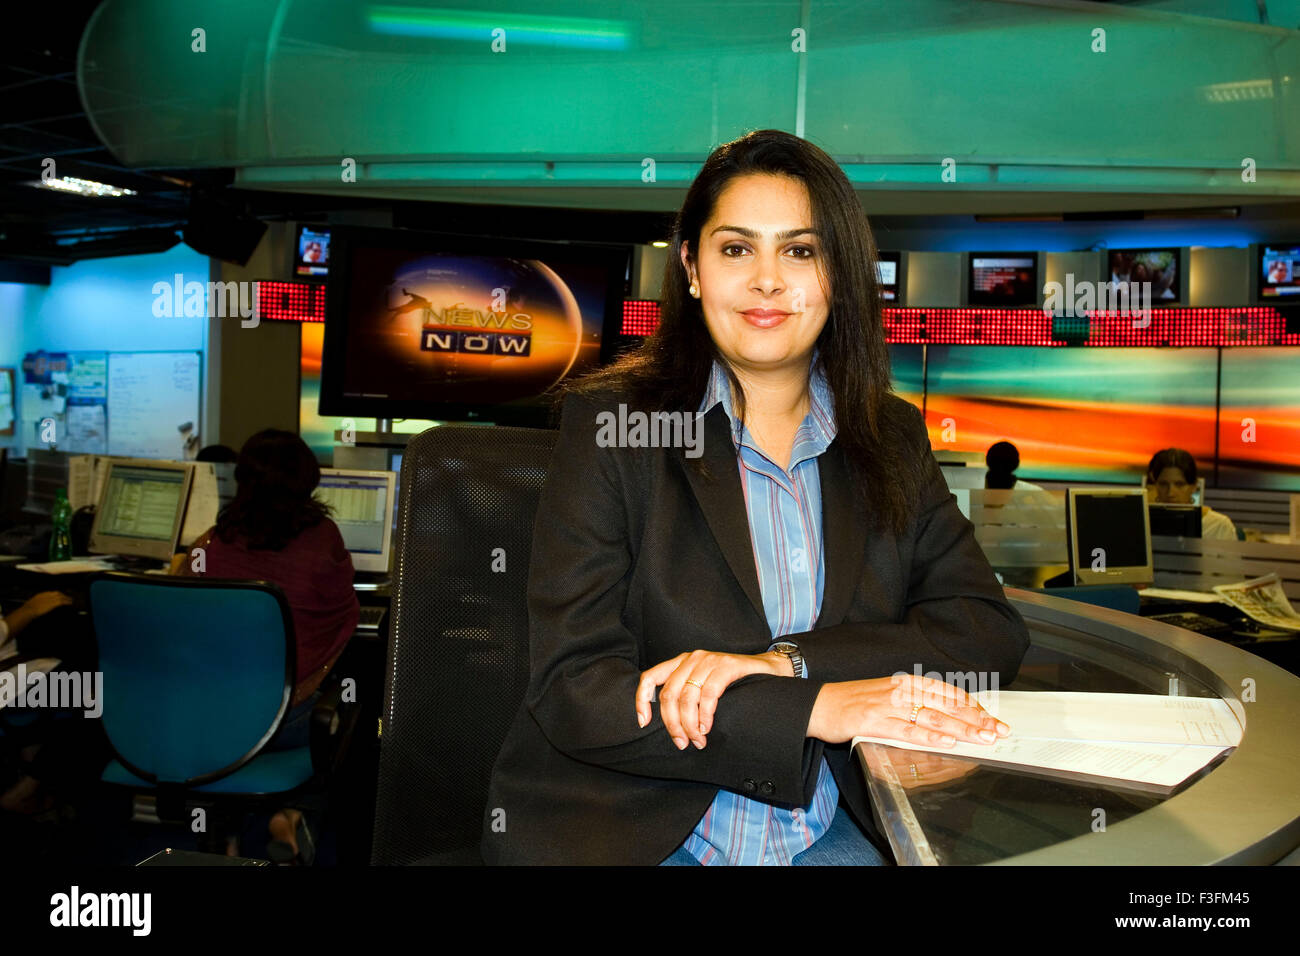 Mini Menon, journalist and author, Times Now, News Now, TV Channel, Editor, India, Asia Stock Photo